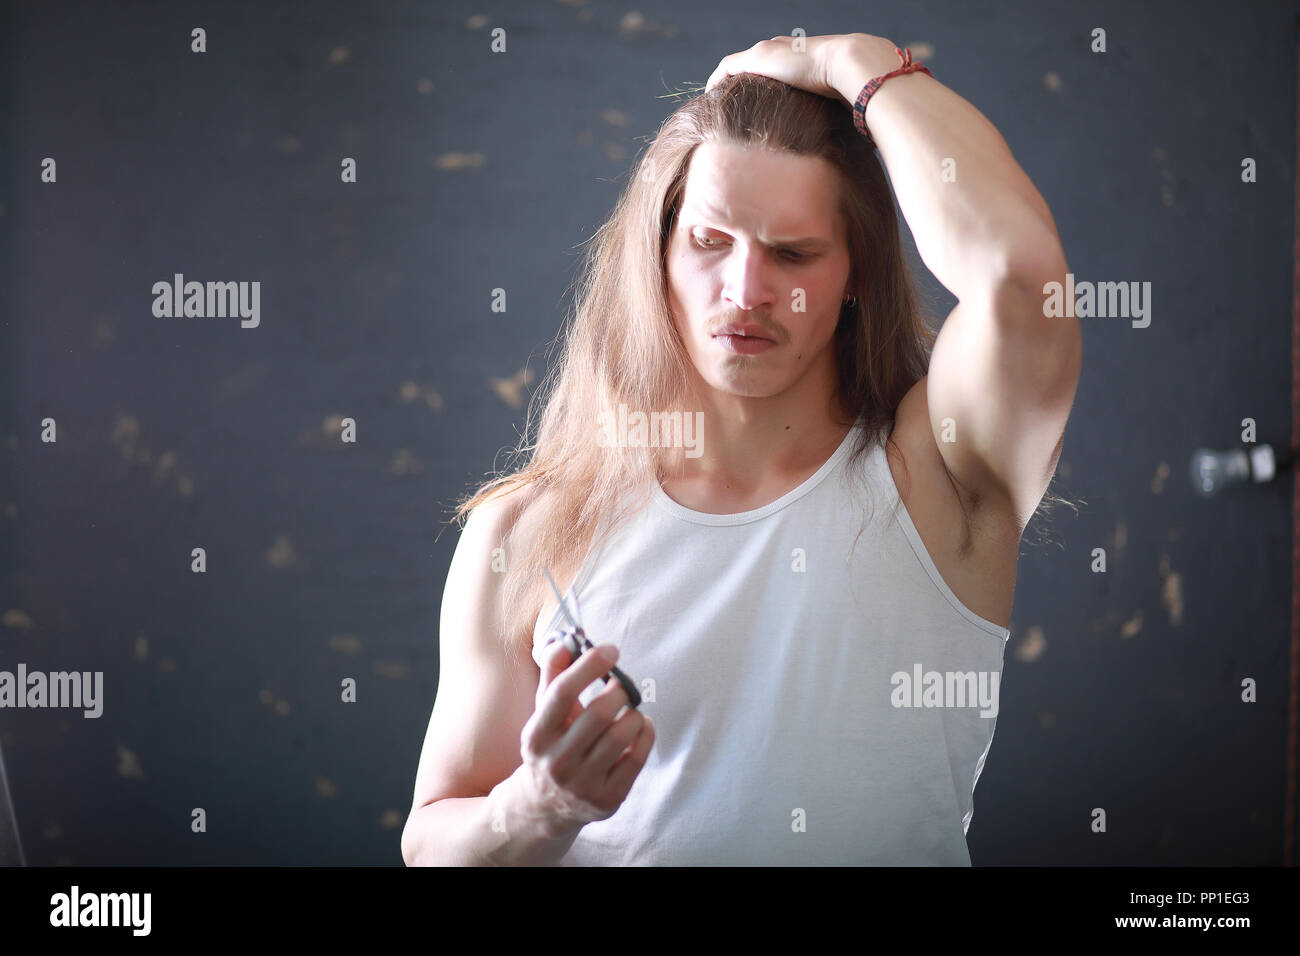 A Young Man With Long Hair Cut A Lock Stock Photo 220080227